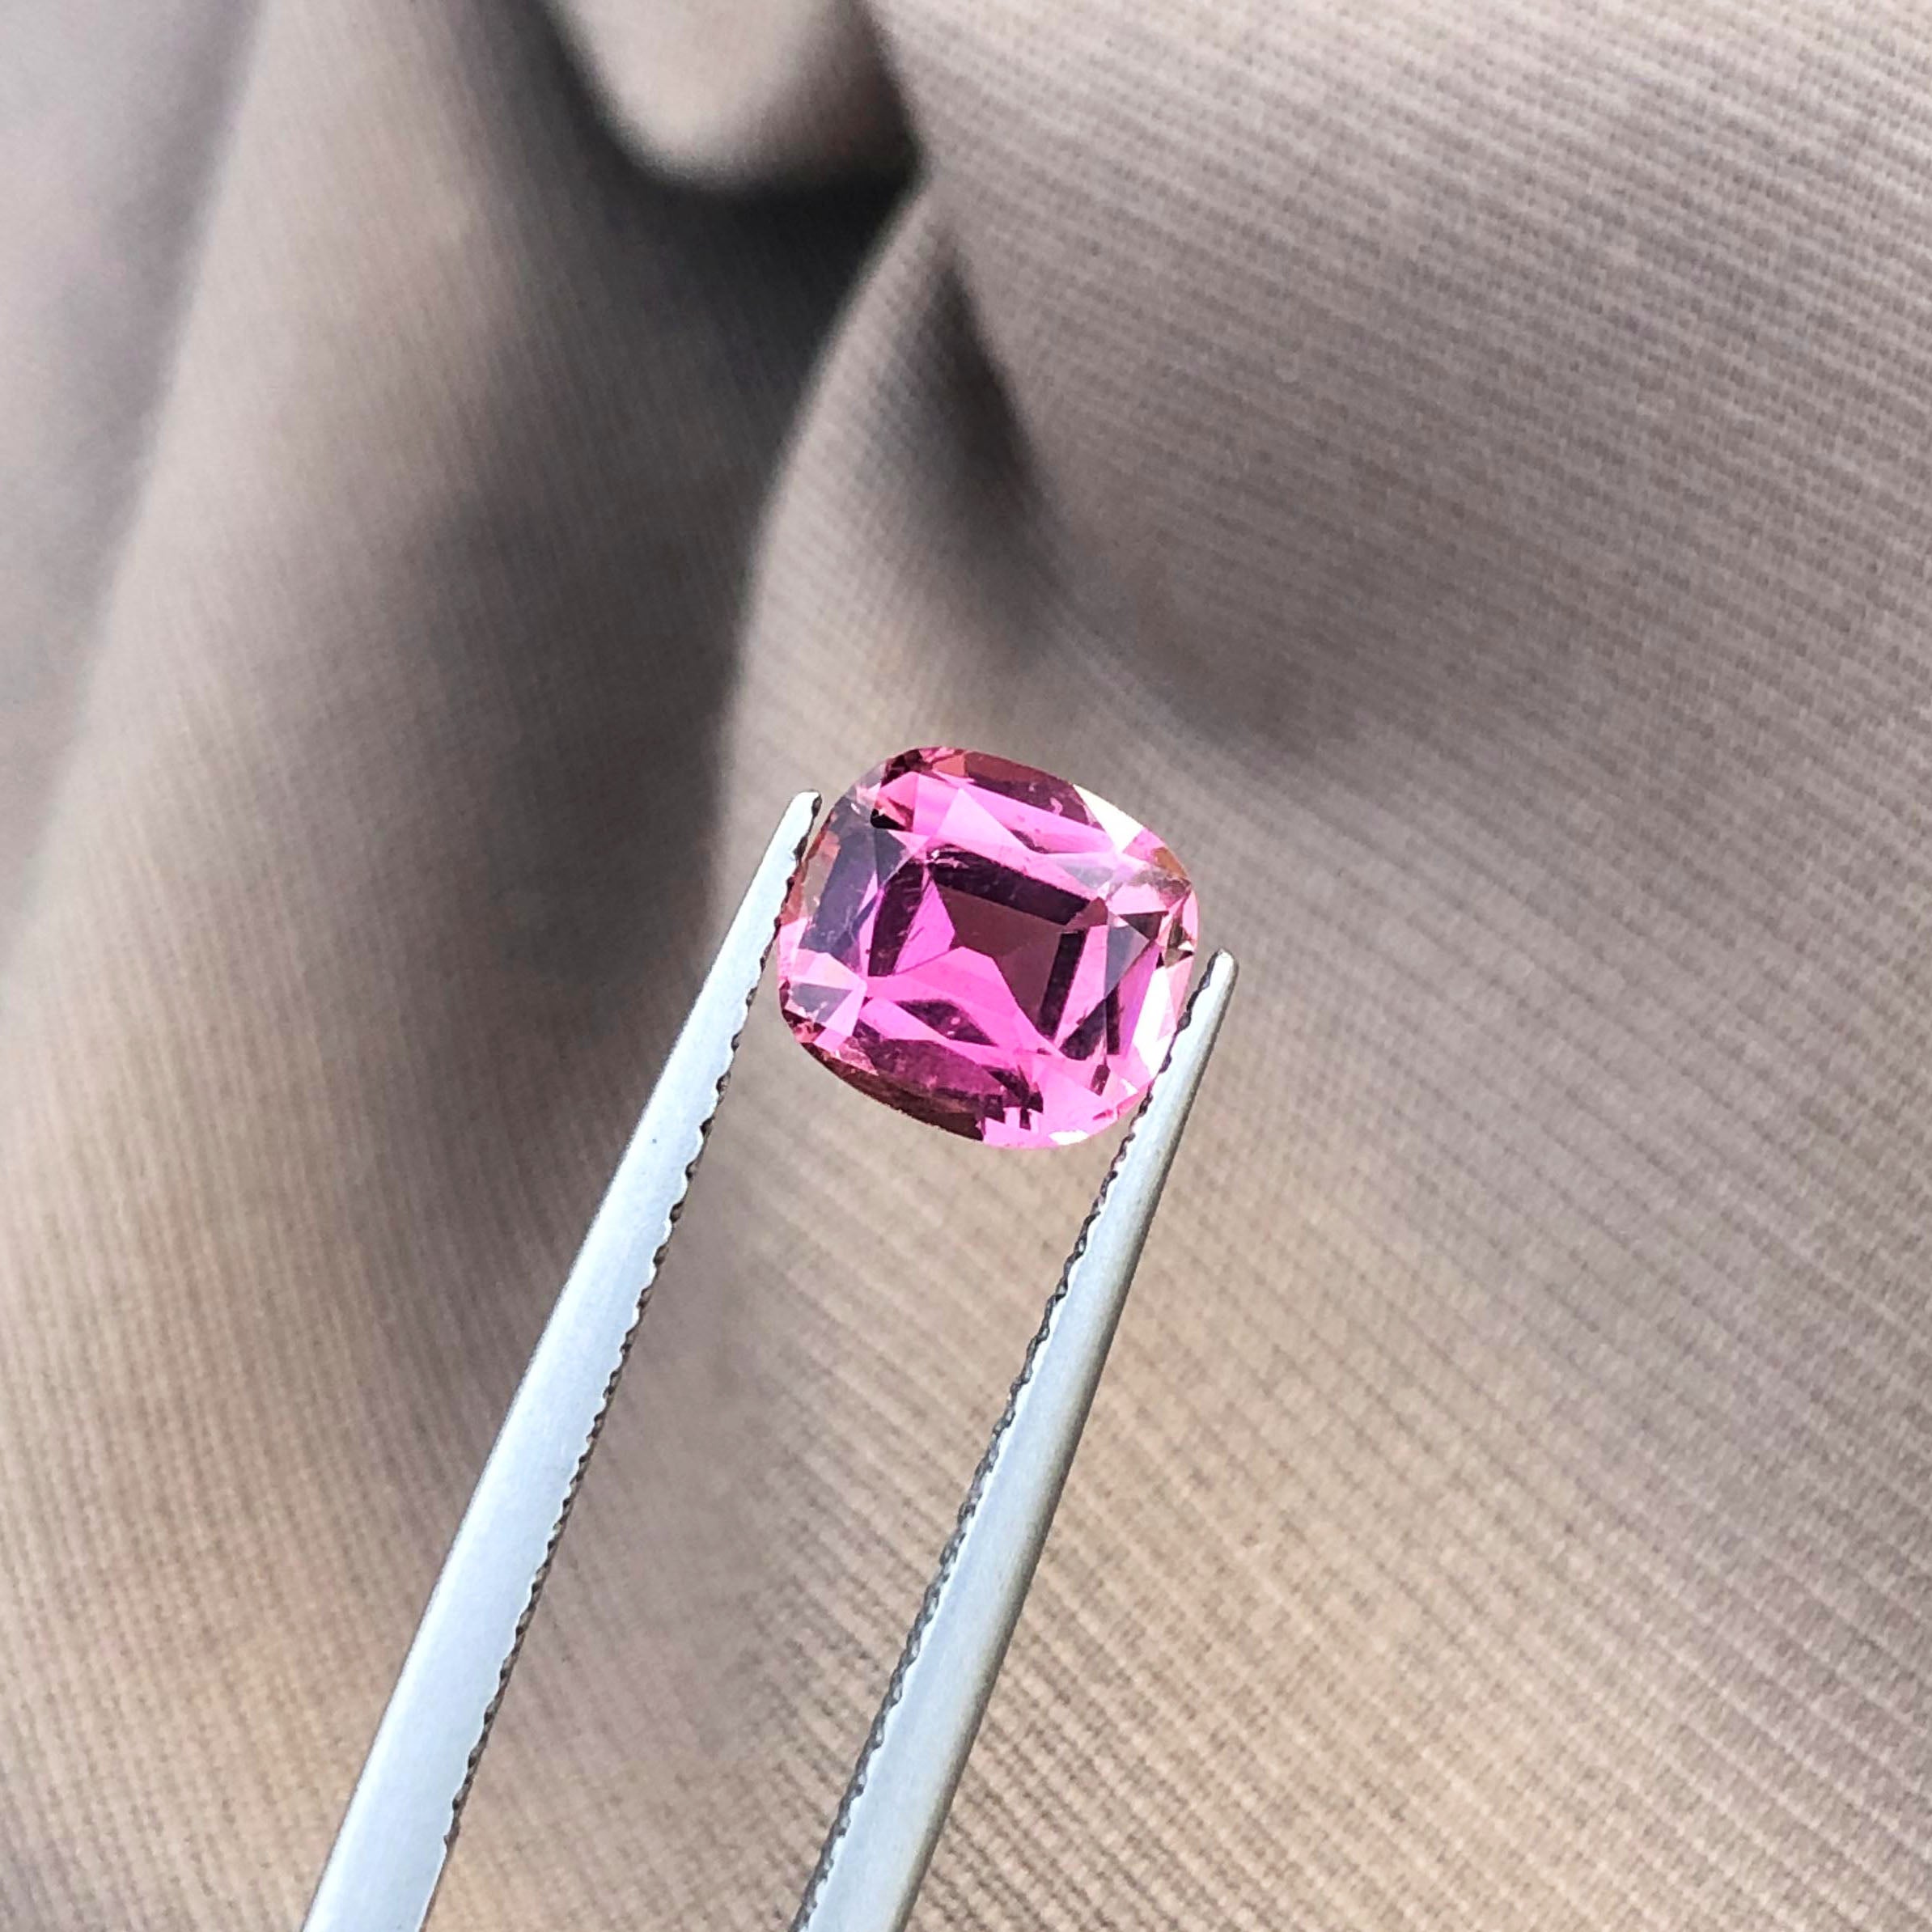 Pink Tourmaline Gemstone For Ring, Faceted Tourmaline Loose Stone, 1.65 CT